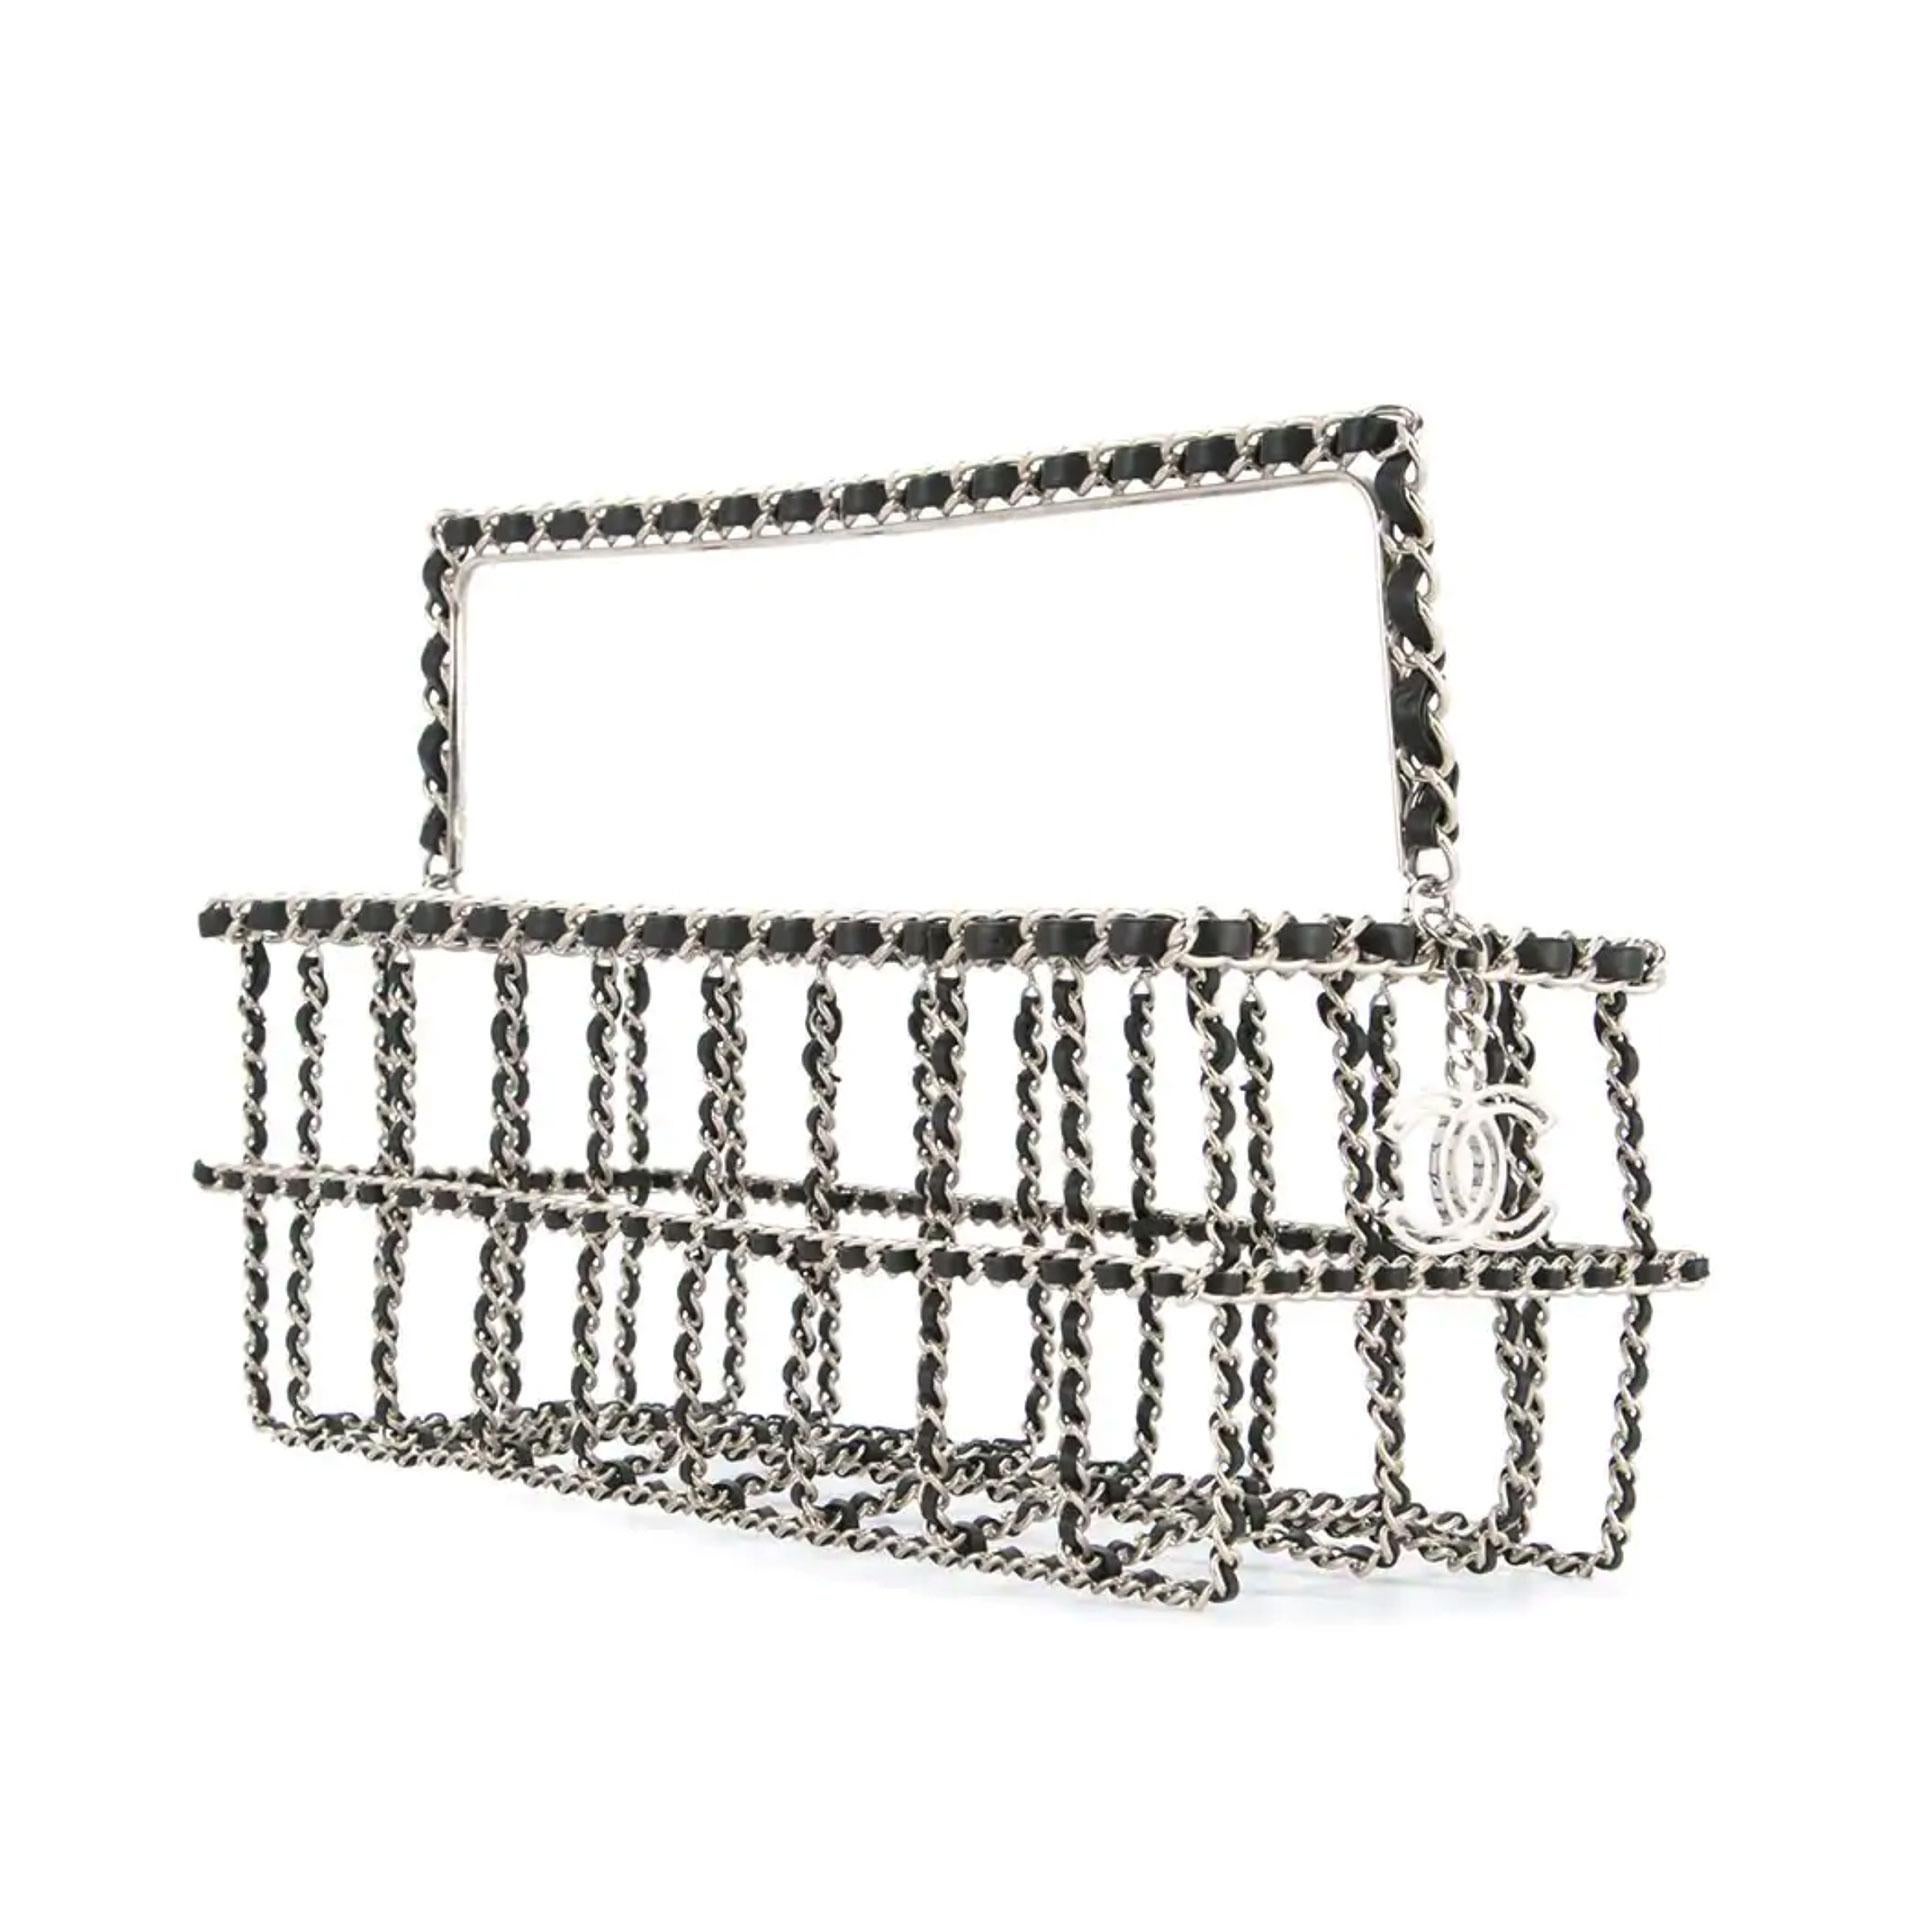 Chanel classic silver interwoven chain in the form of a rectangle sized grocery shopping basket

Fall 2014
Silver hardware
Classic interwoven chain
CC Silver Charm
Can be used for high fashion or interior decor
Handle drop: 3.1